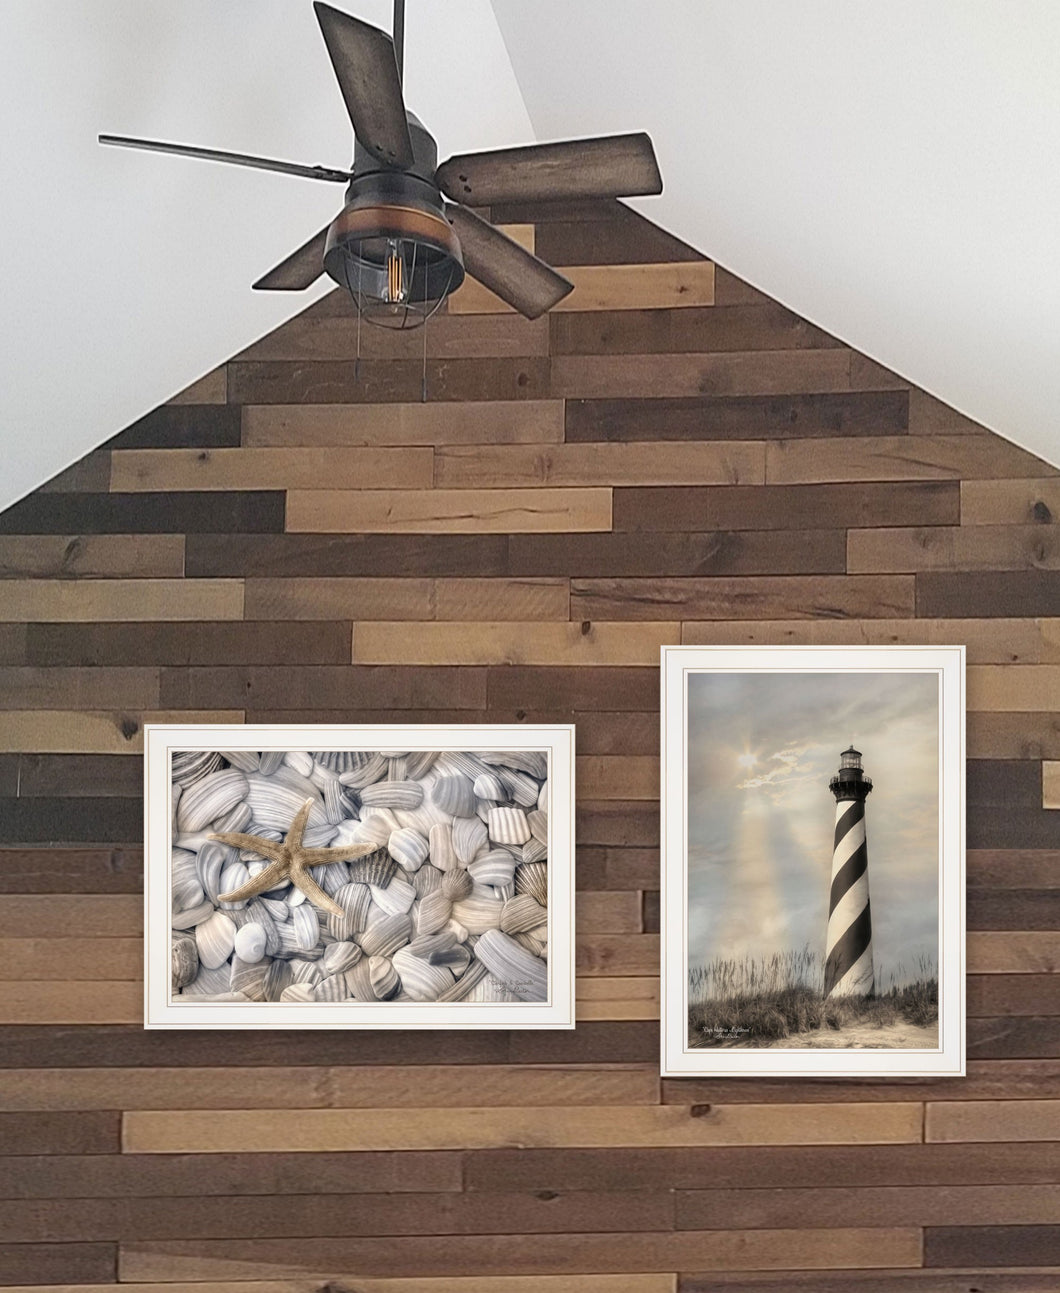 Set Of Two Cape Hatteras Lighthouse And Sea Shells 3 White Framed Print Wall Art - Buy JJ's Stuff